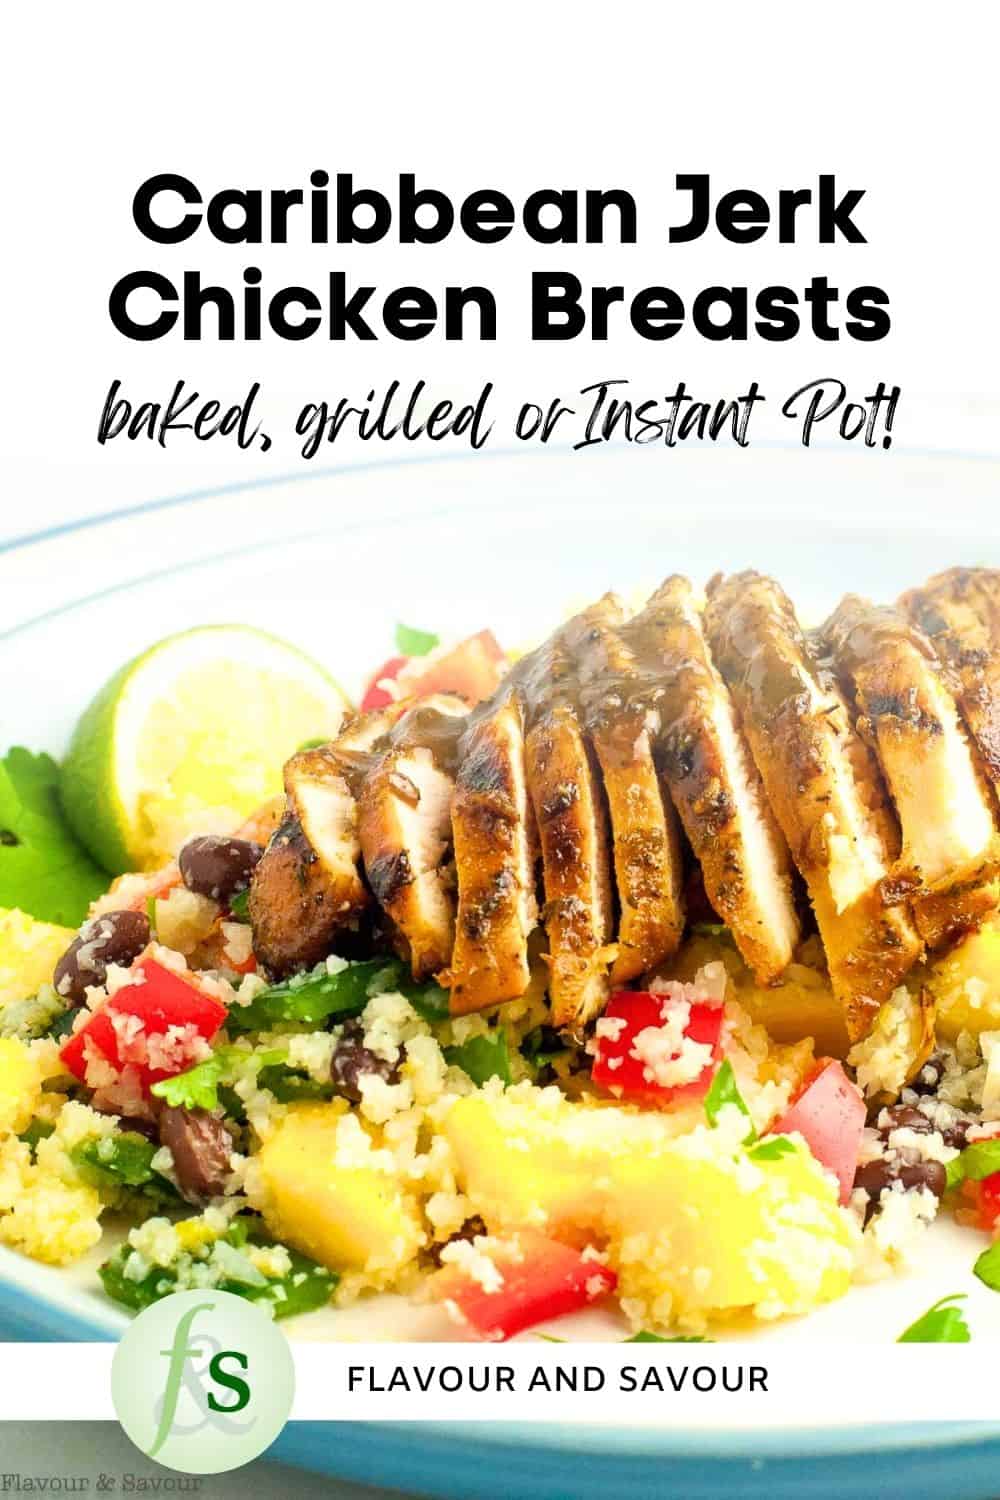 Image with text overlay for Caribbean Jerk Chicken Breasts.